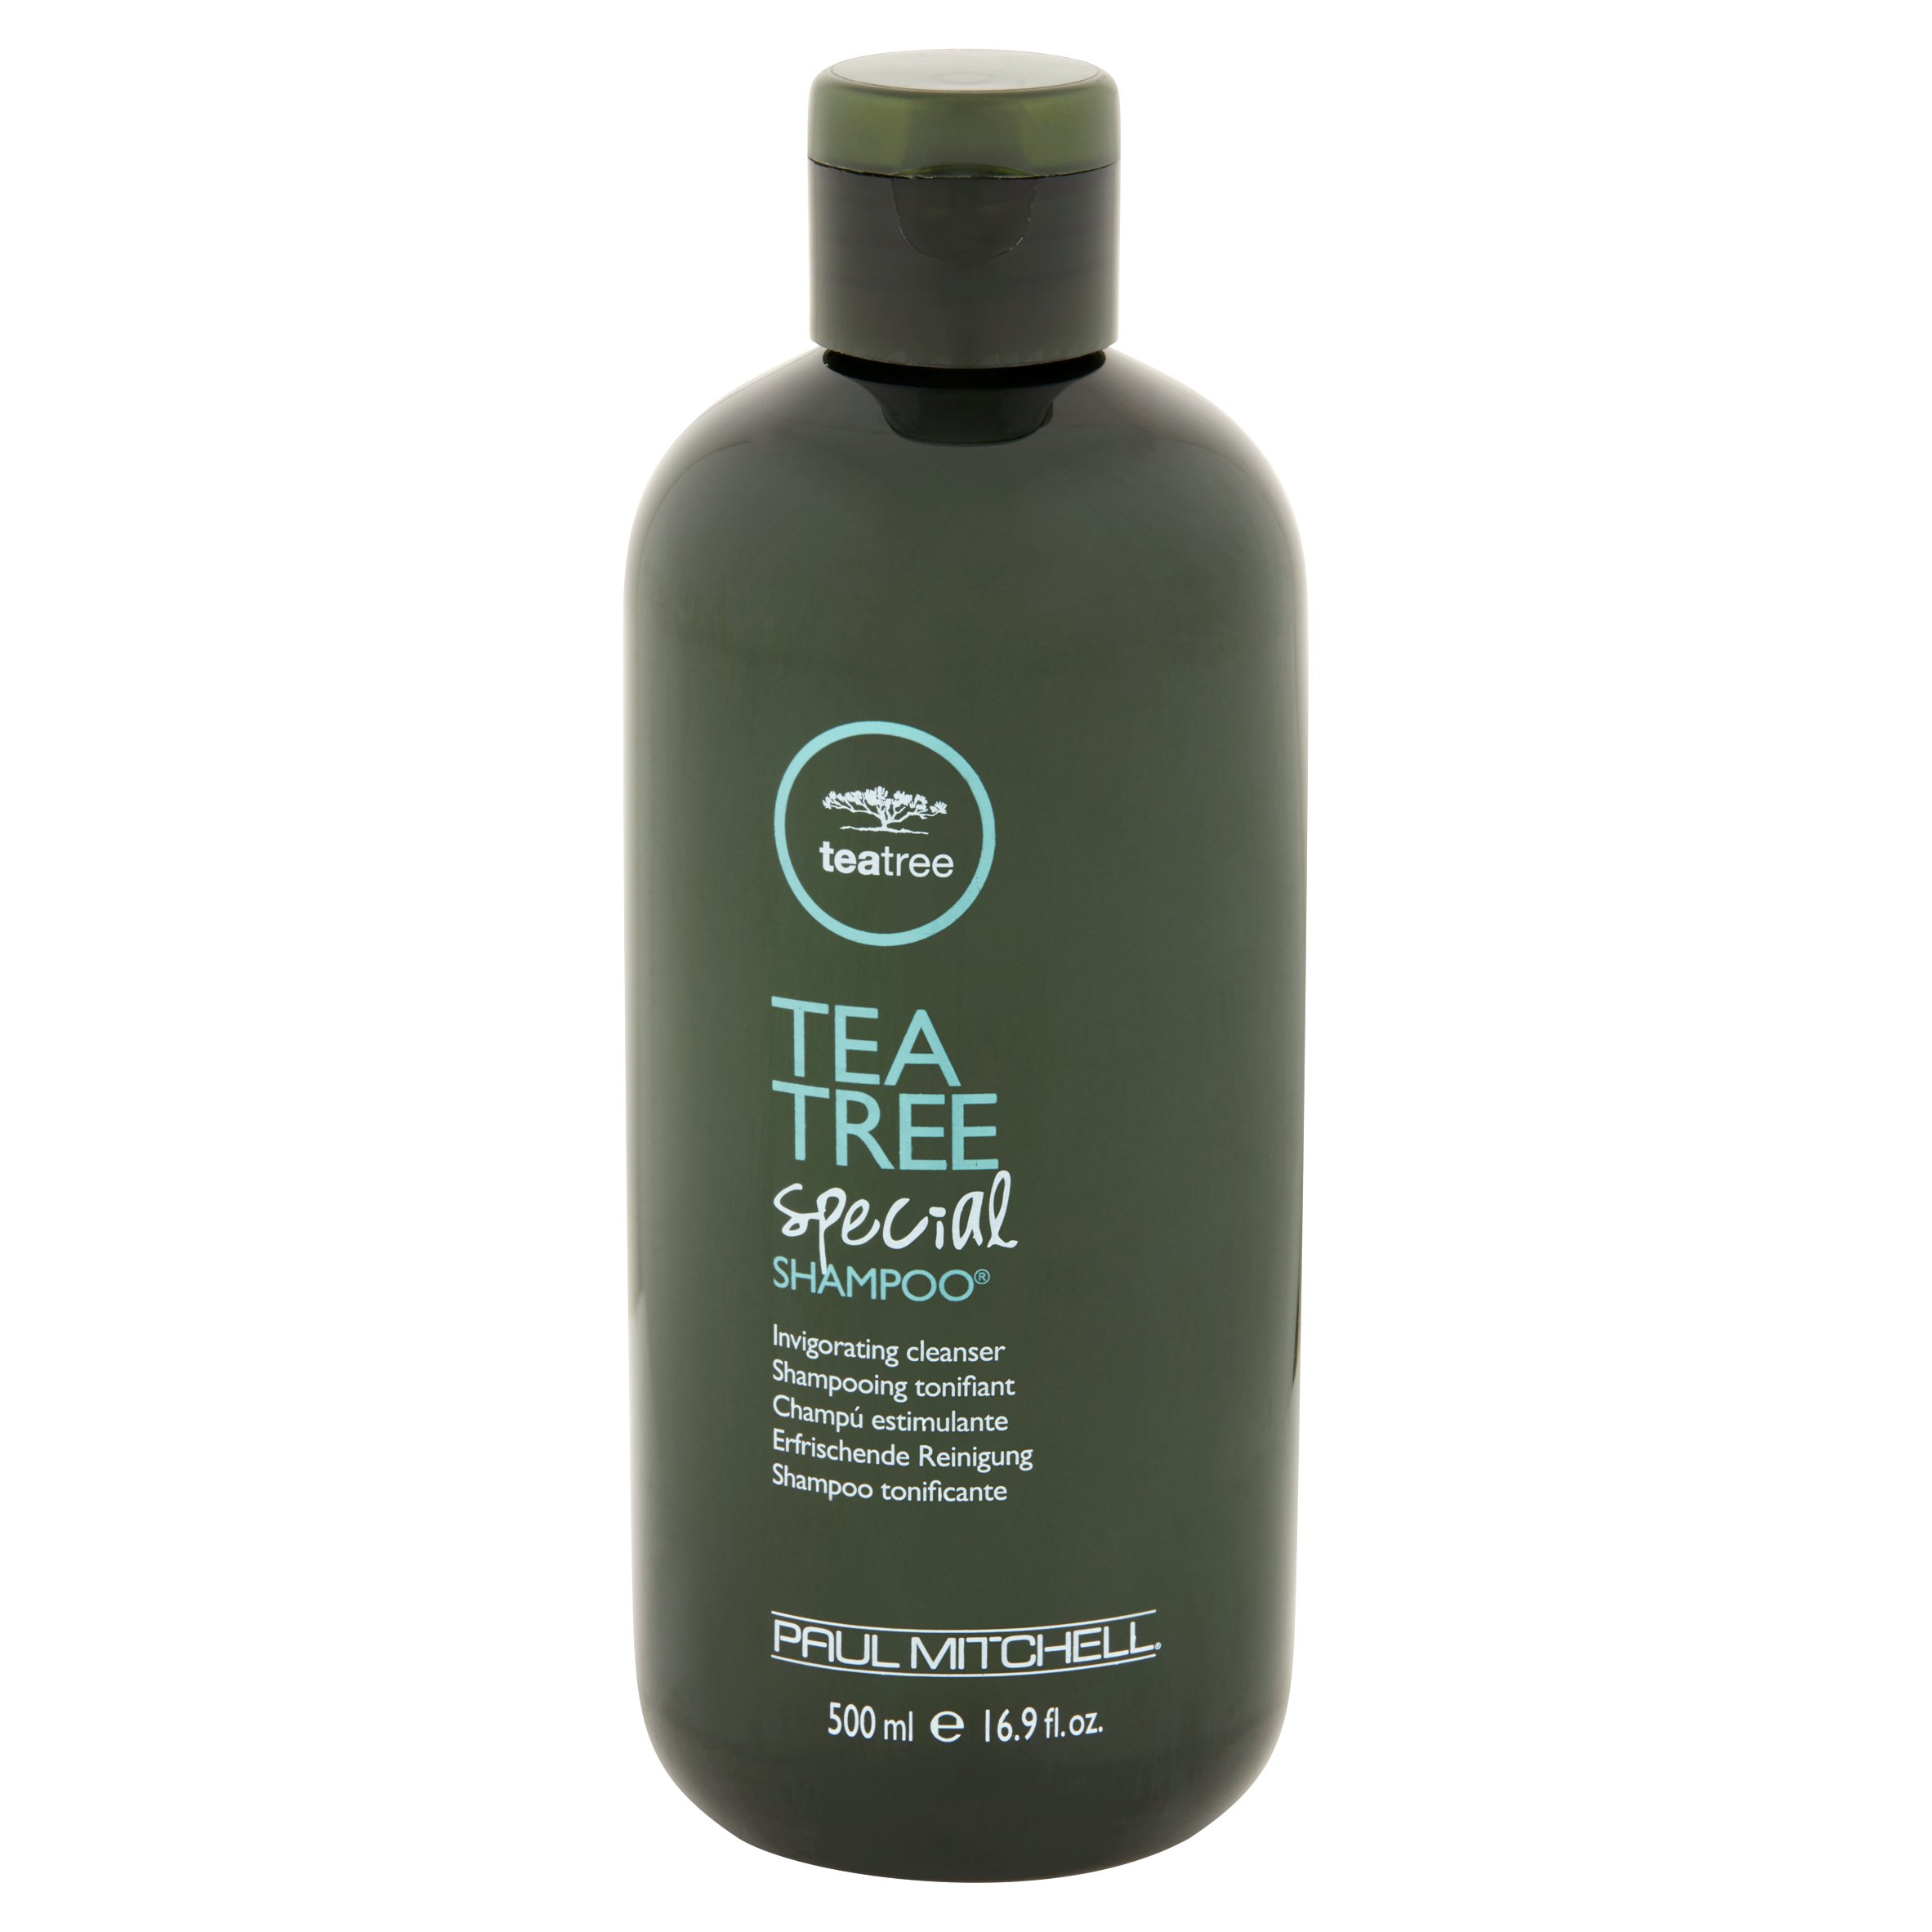 Paul Mitchell Tea Tree Special Clarifying Daily Shampoo with Peppermint & Lavender, 16.9 fl oz - image 2 of 4